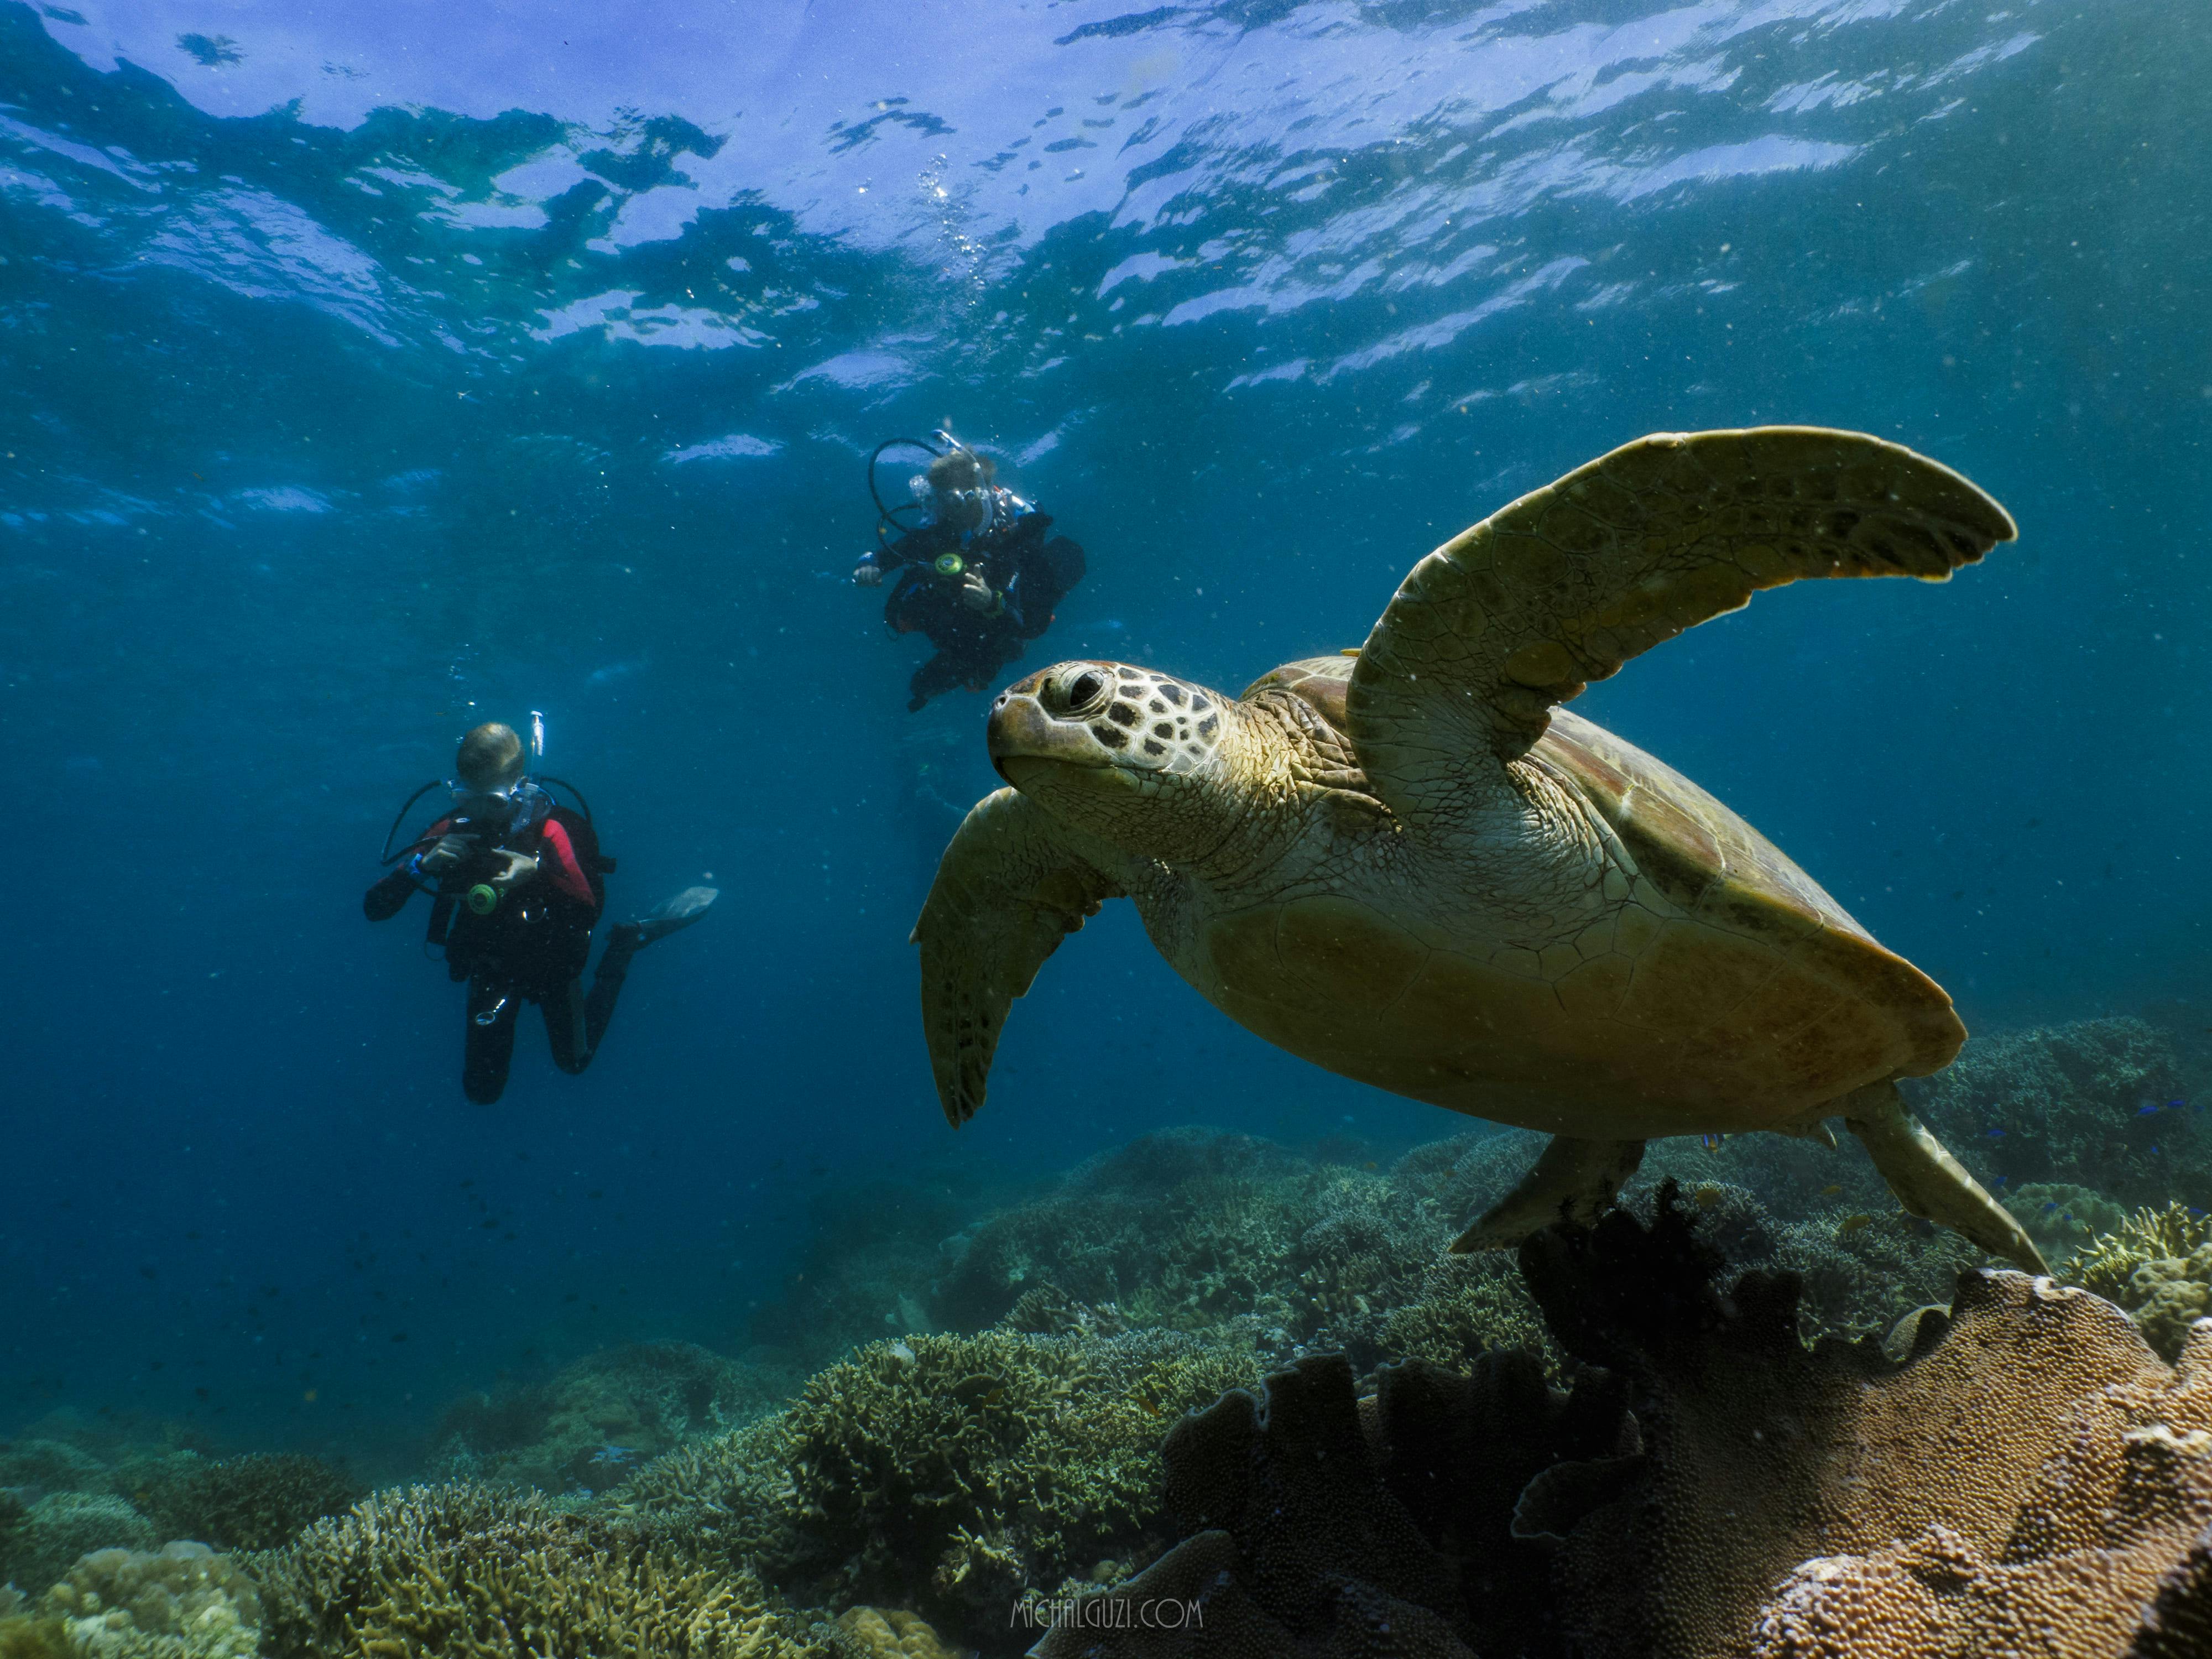 A sea turtle as seen during a diving session in Cebu